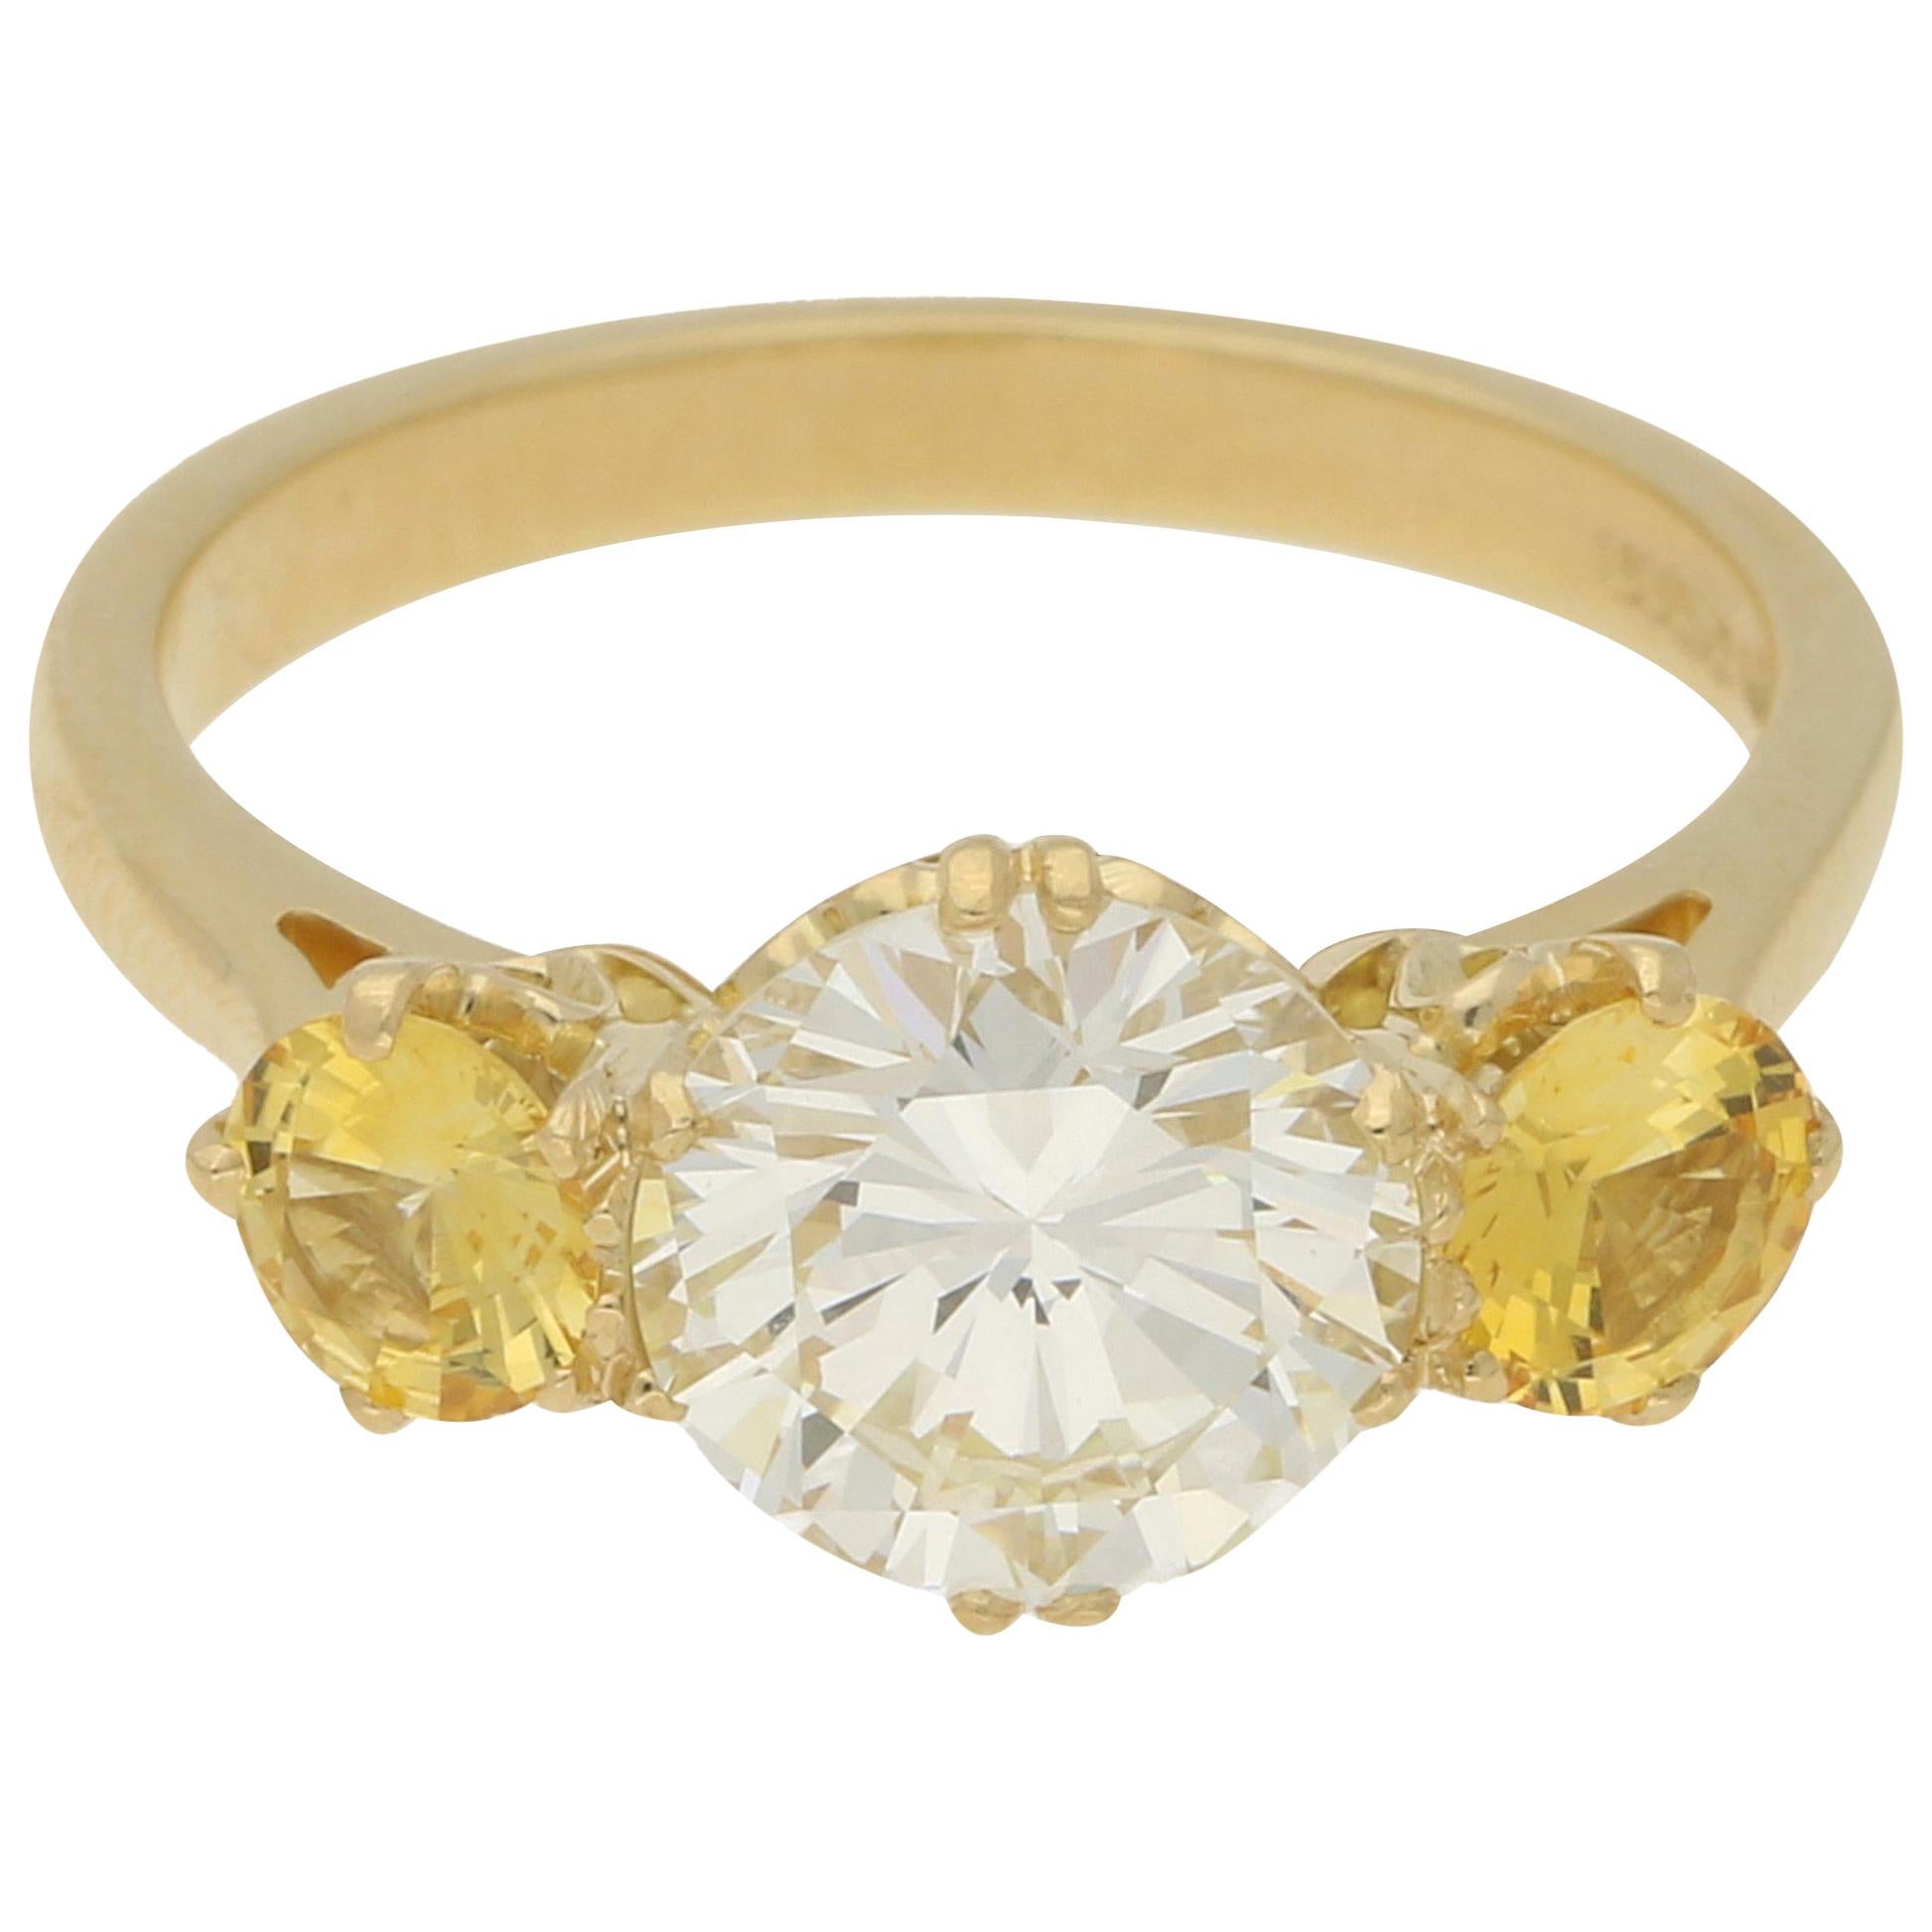 Diamond and Yellow Sapphire Ring in 18 Carat Yellow Gold